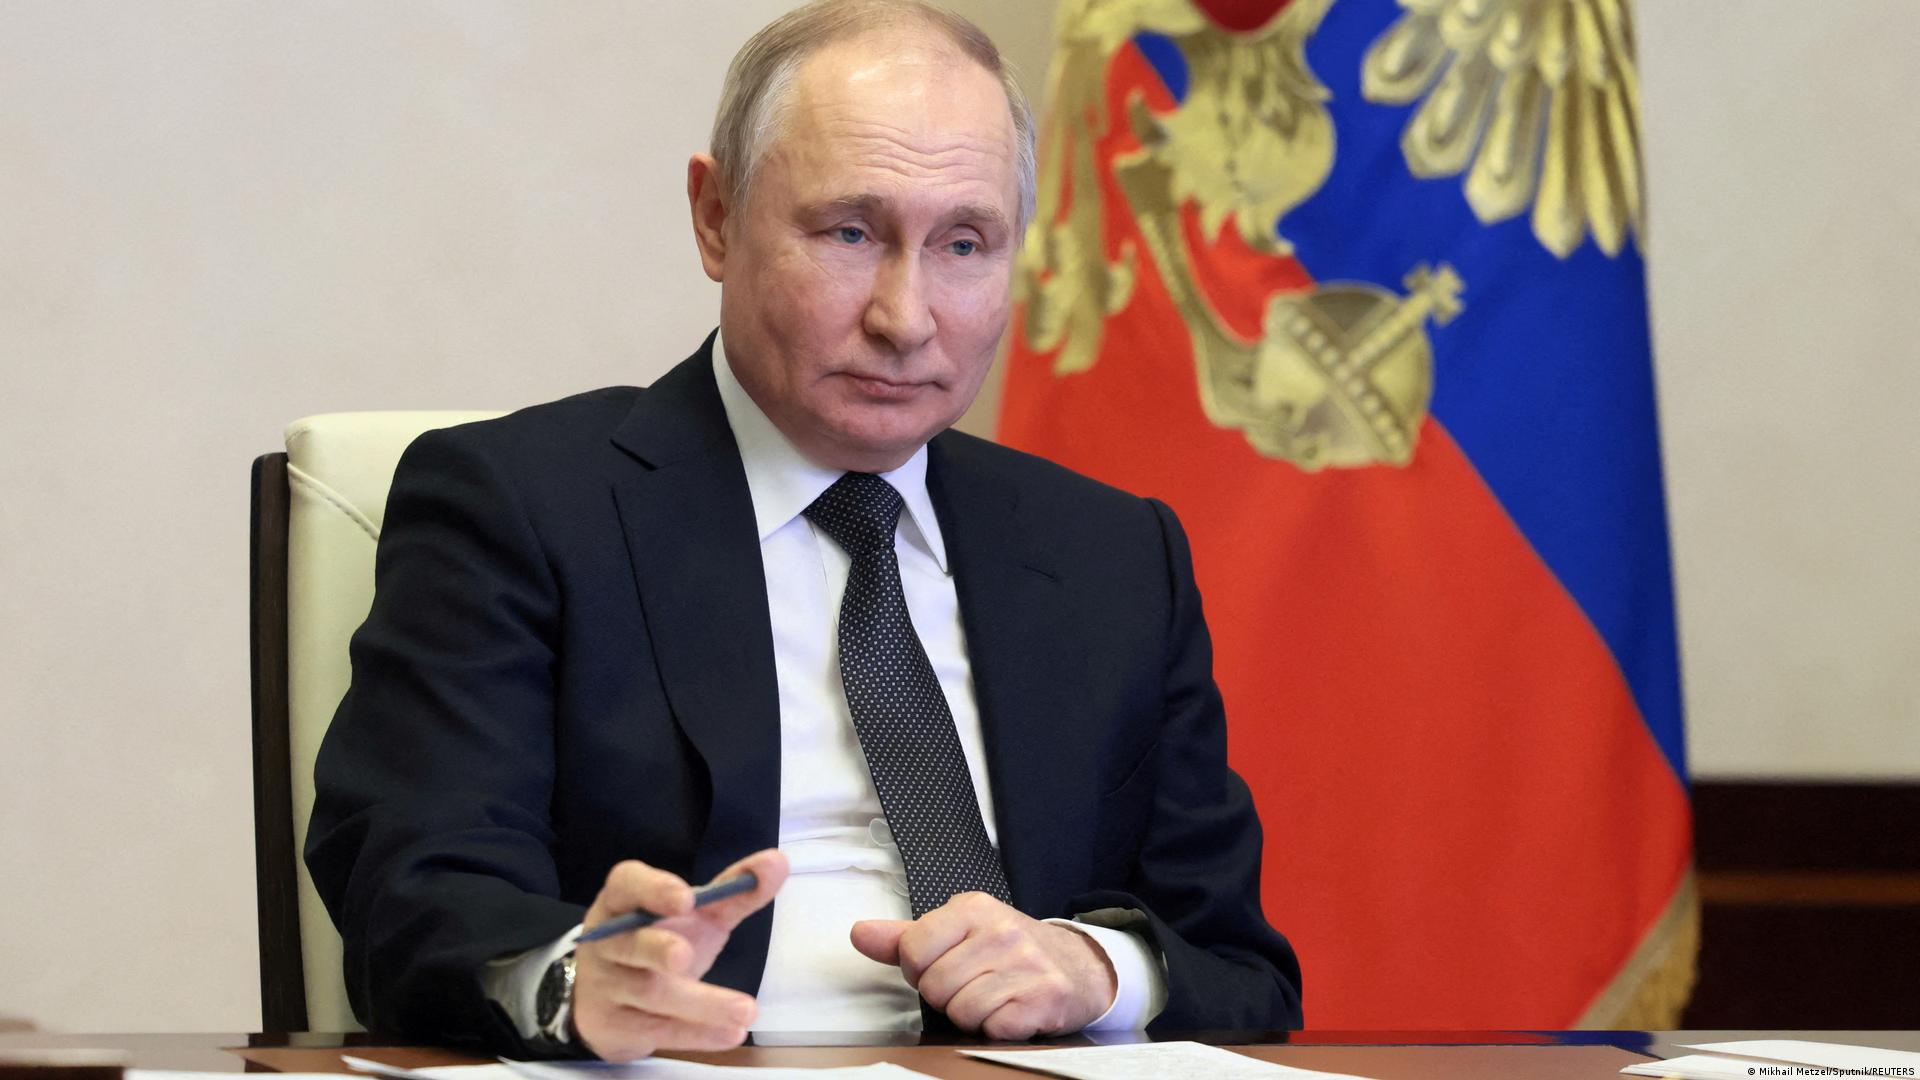 Putin criticizes the West in his State of the Nation address